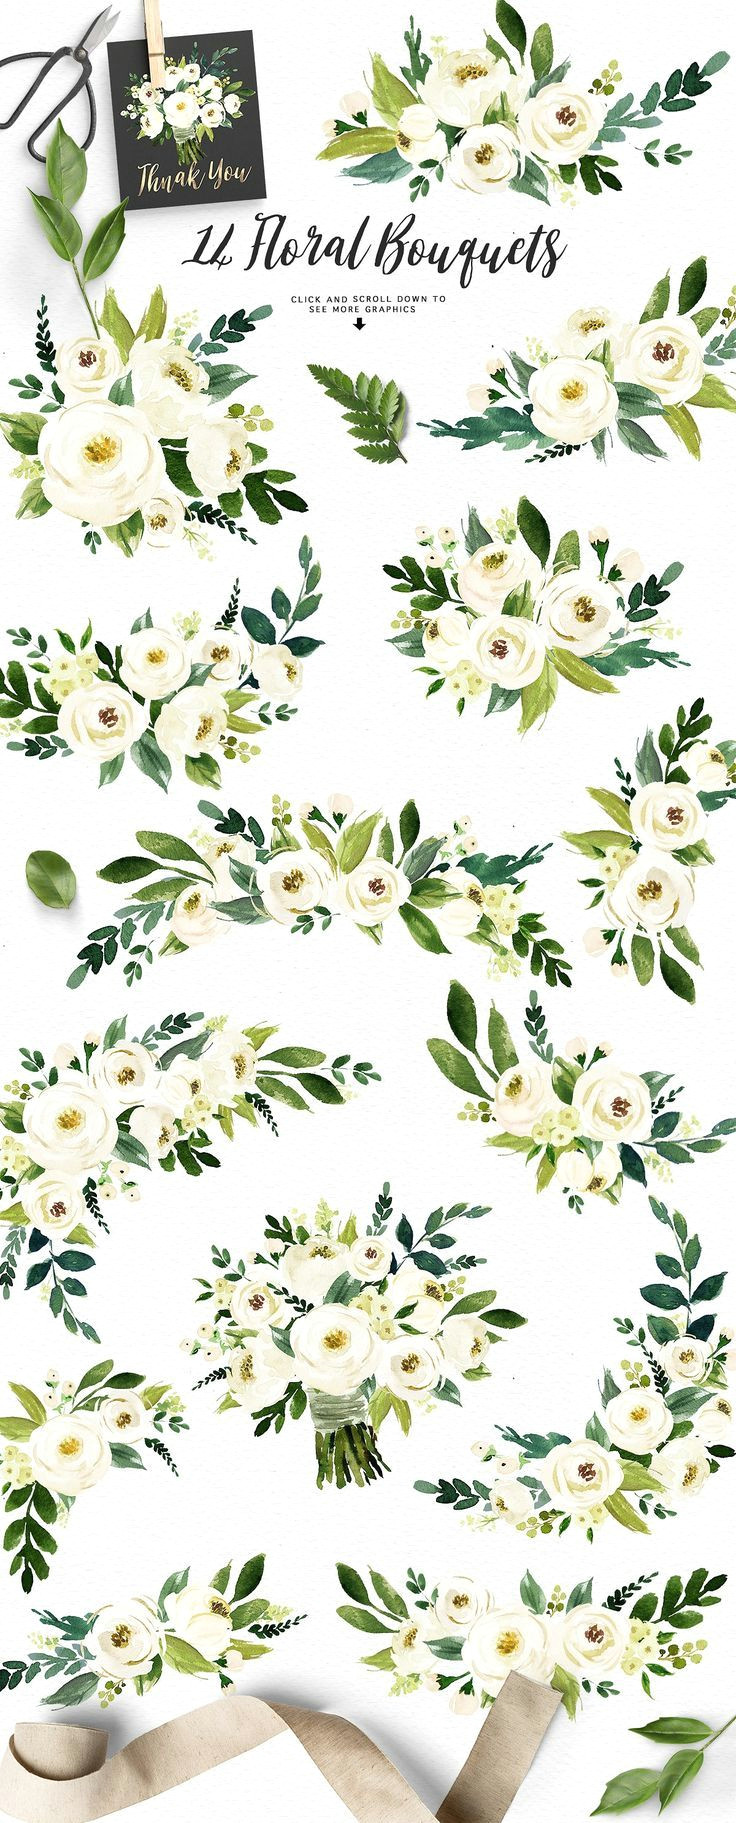 Graphic Drawings Of Flowers Pin by Pornthida On Prints Patterns Watercolor Art Watercolor Art